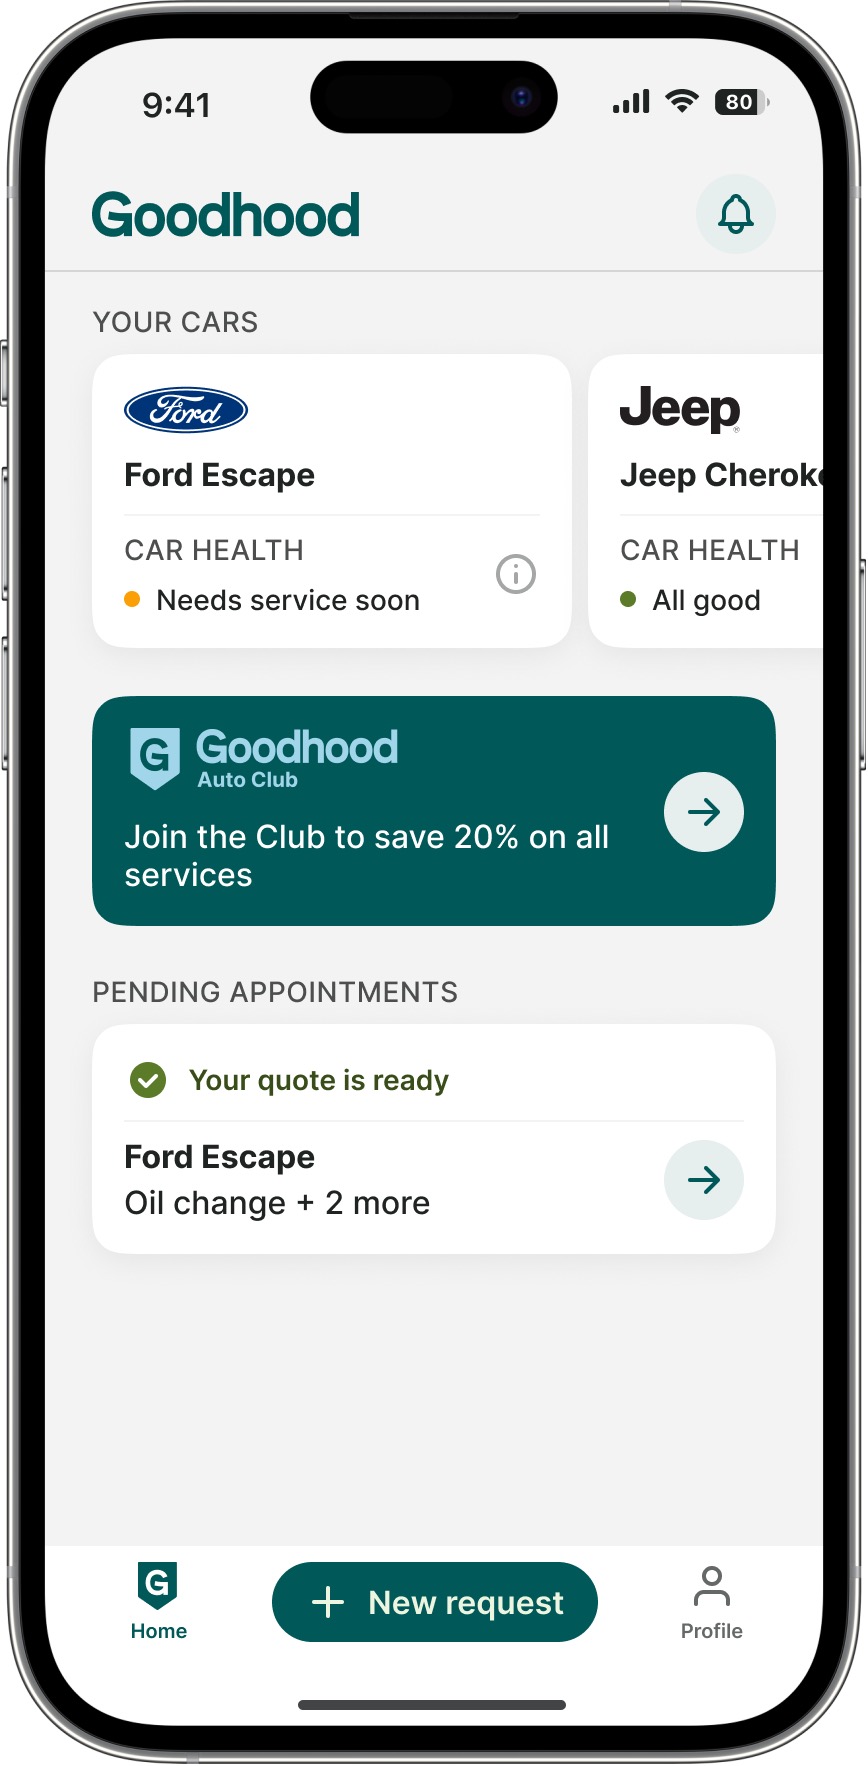 The Goodhood Auto Club allows members to get free unlimited oil changes, discounts, and a dedicated car tech.